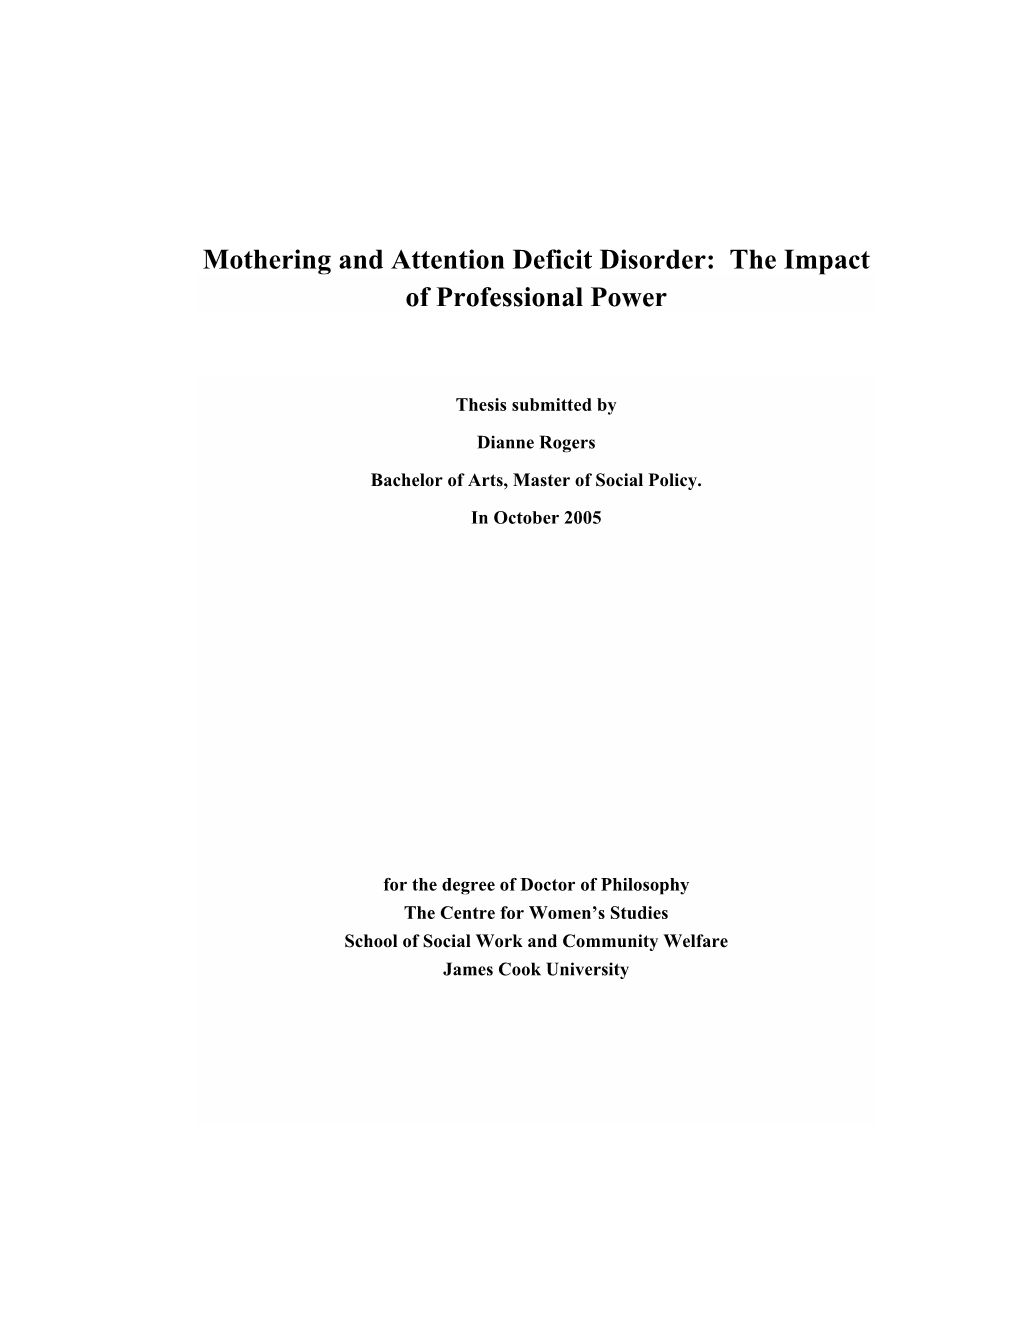 Mothering and Attention Deficit Disorder: the Impact of Professional Power